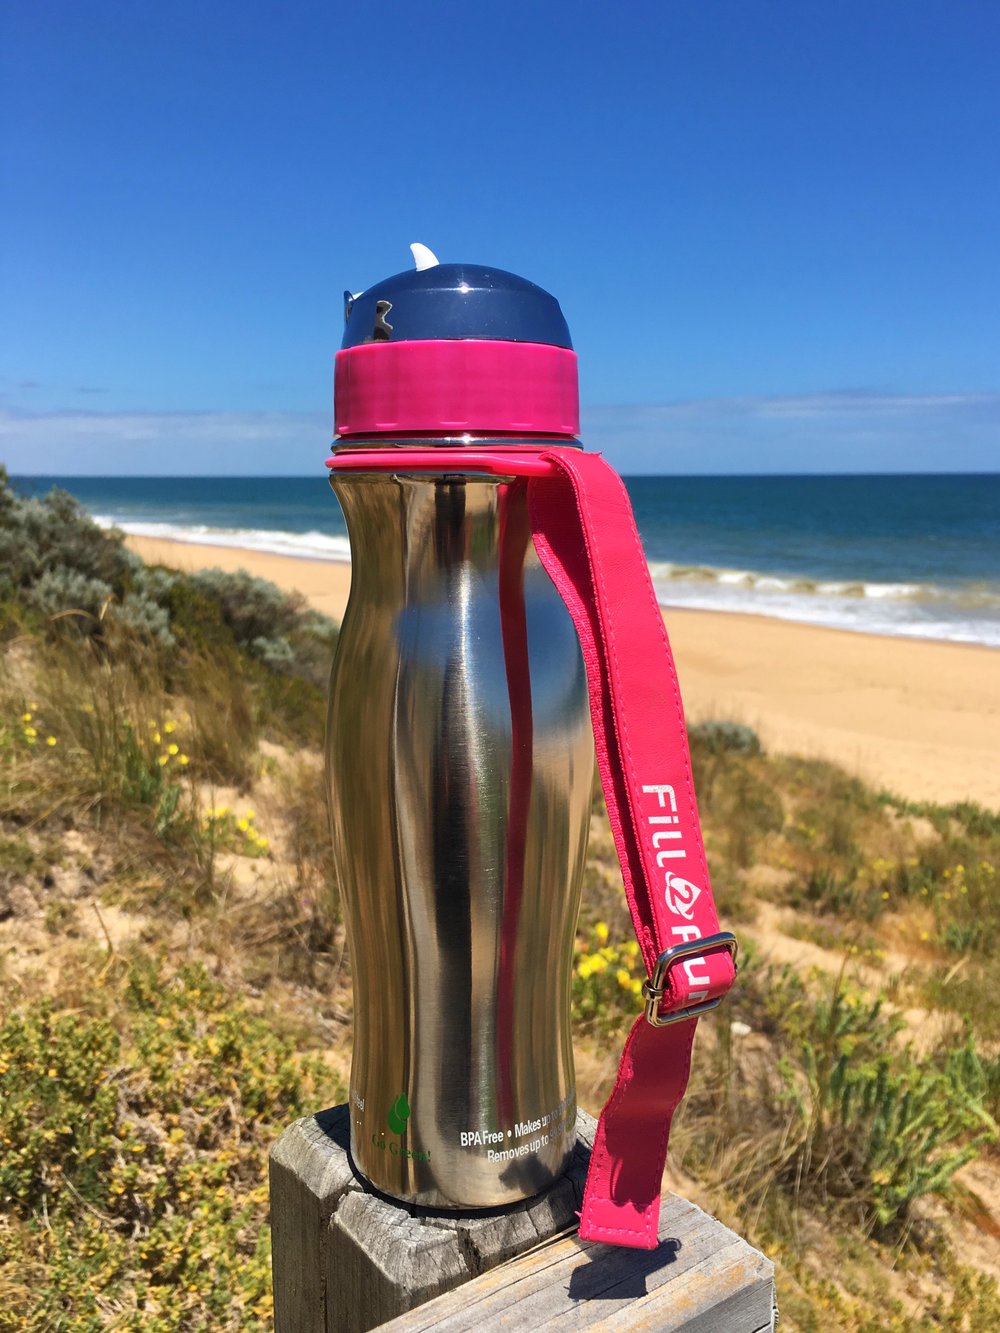 How To Replace Contigo Water Bottle Filter for Wells Water Bottle